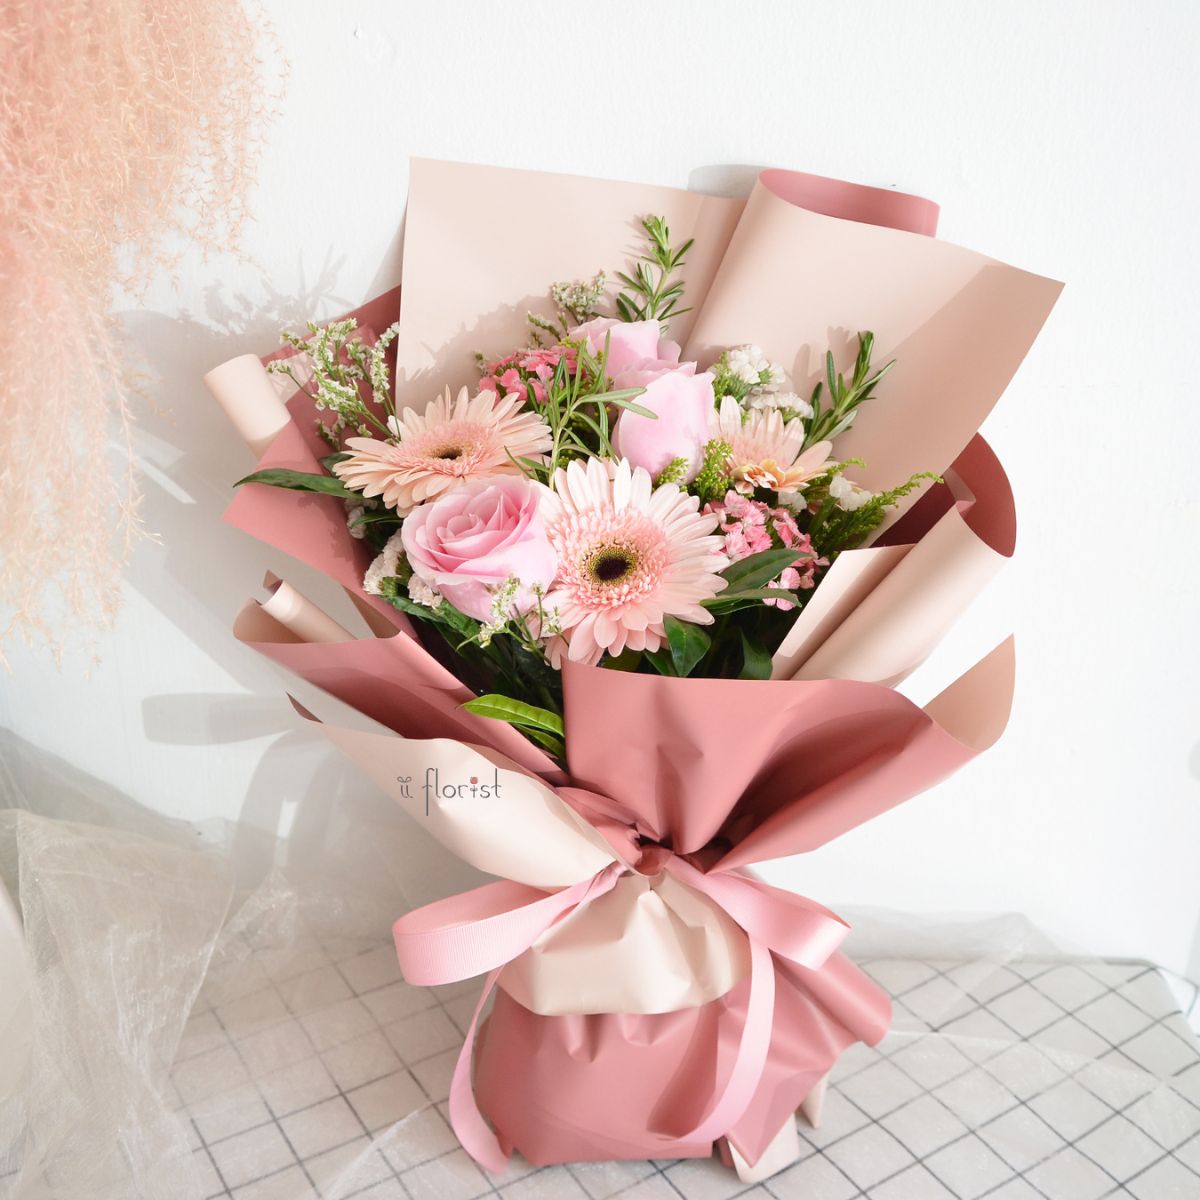 Most popular flowers for gifts featured